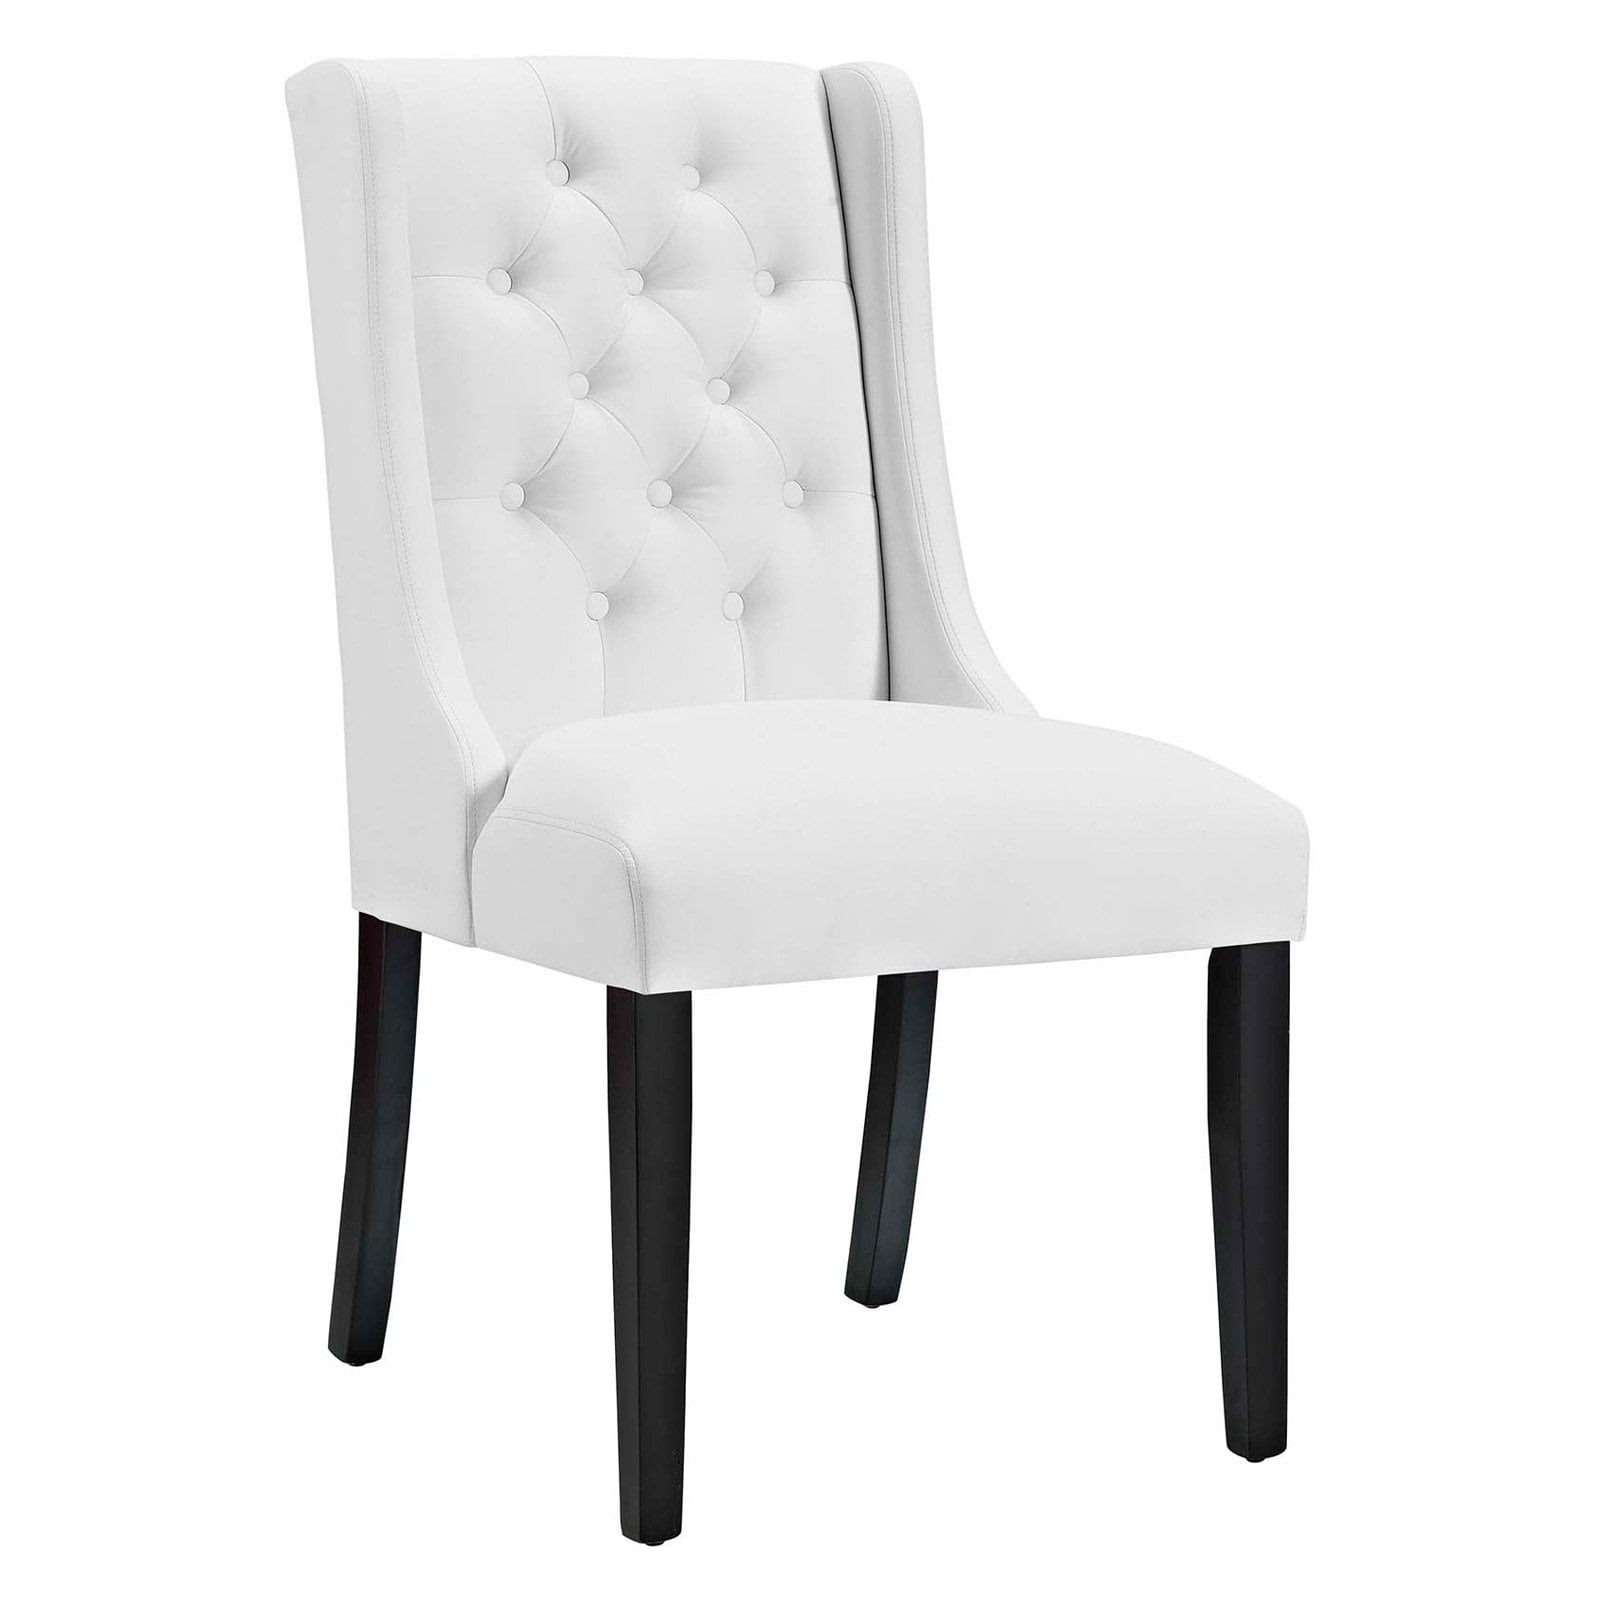 Modway Baronet Leatherette Dining Side Chair, Multiple Colors - Walmart.com